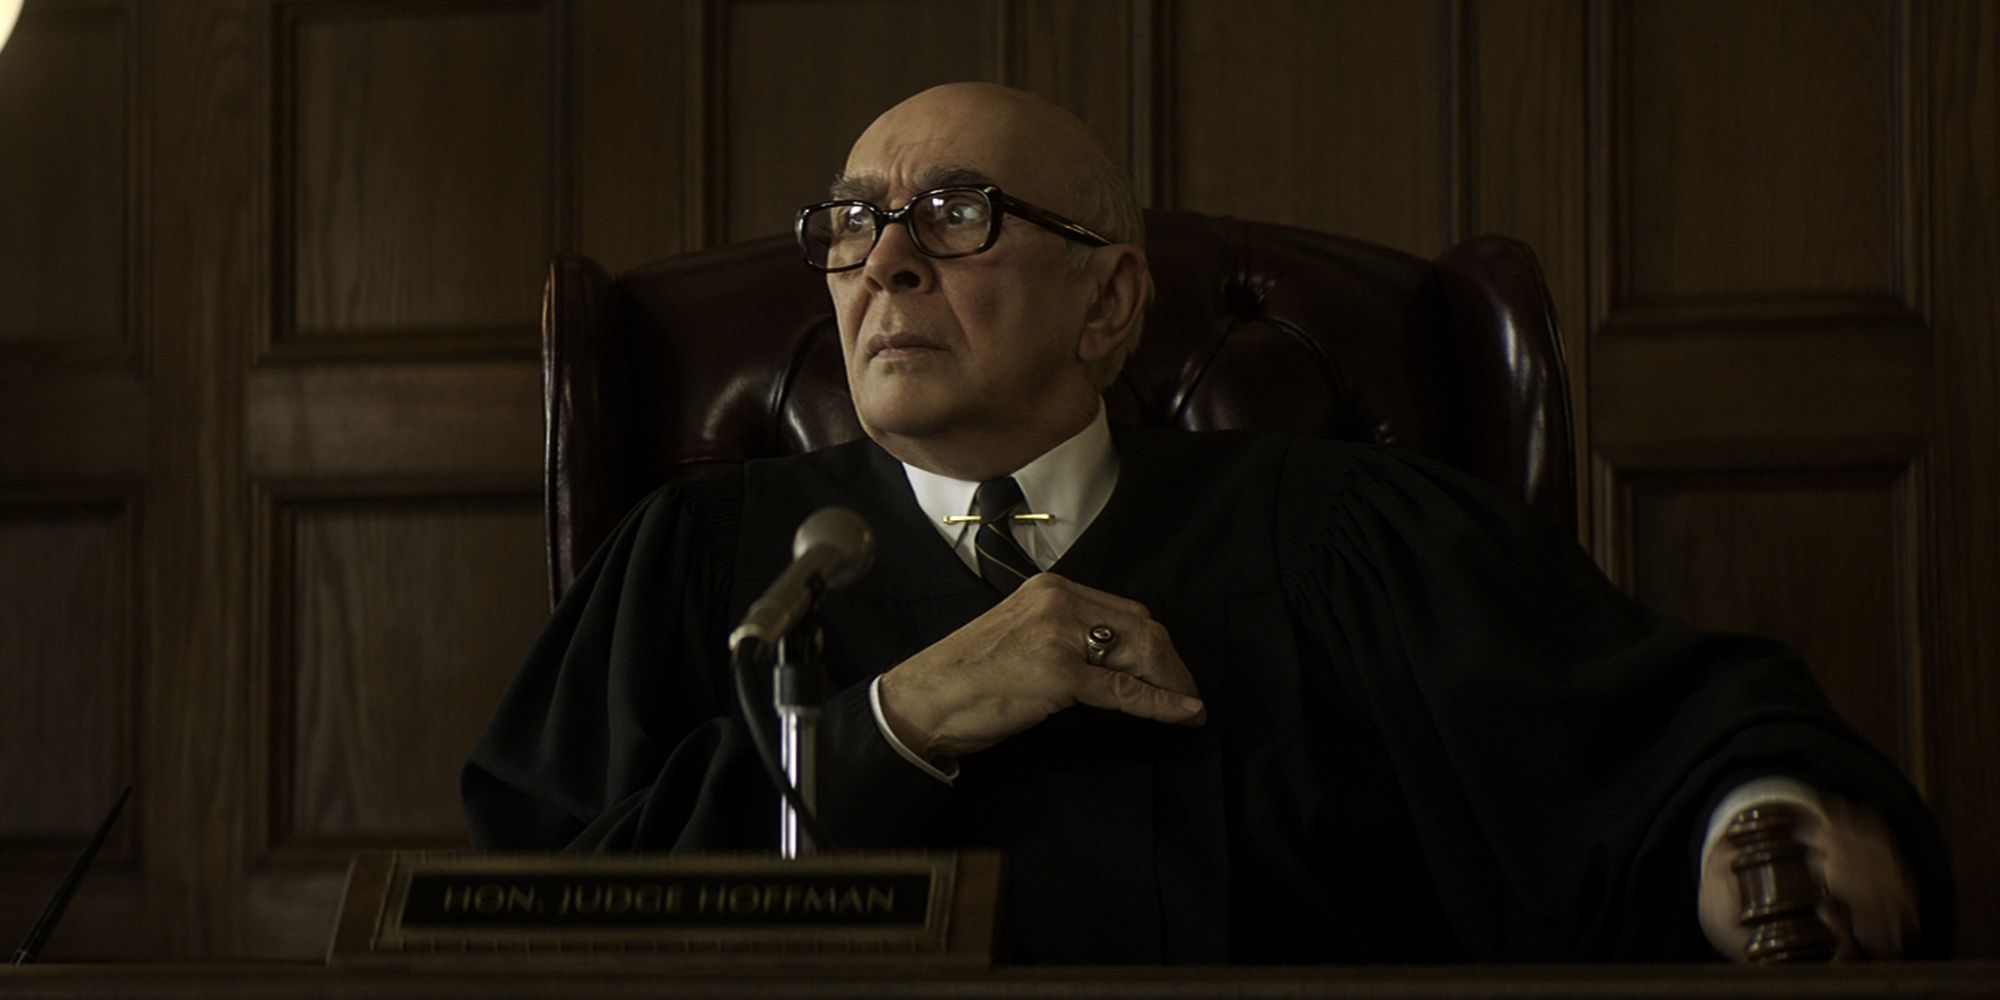 Judge Julius Hoffman who is in charge of the case